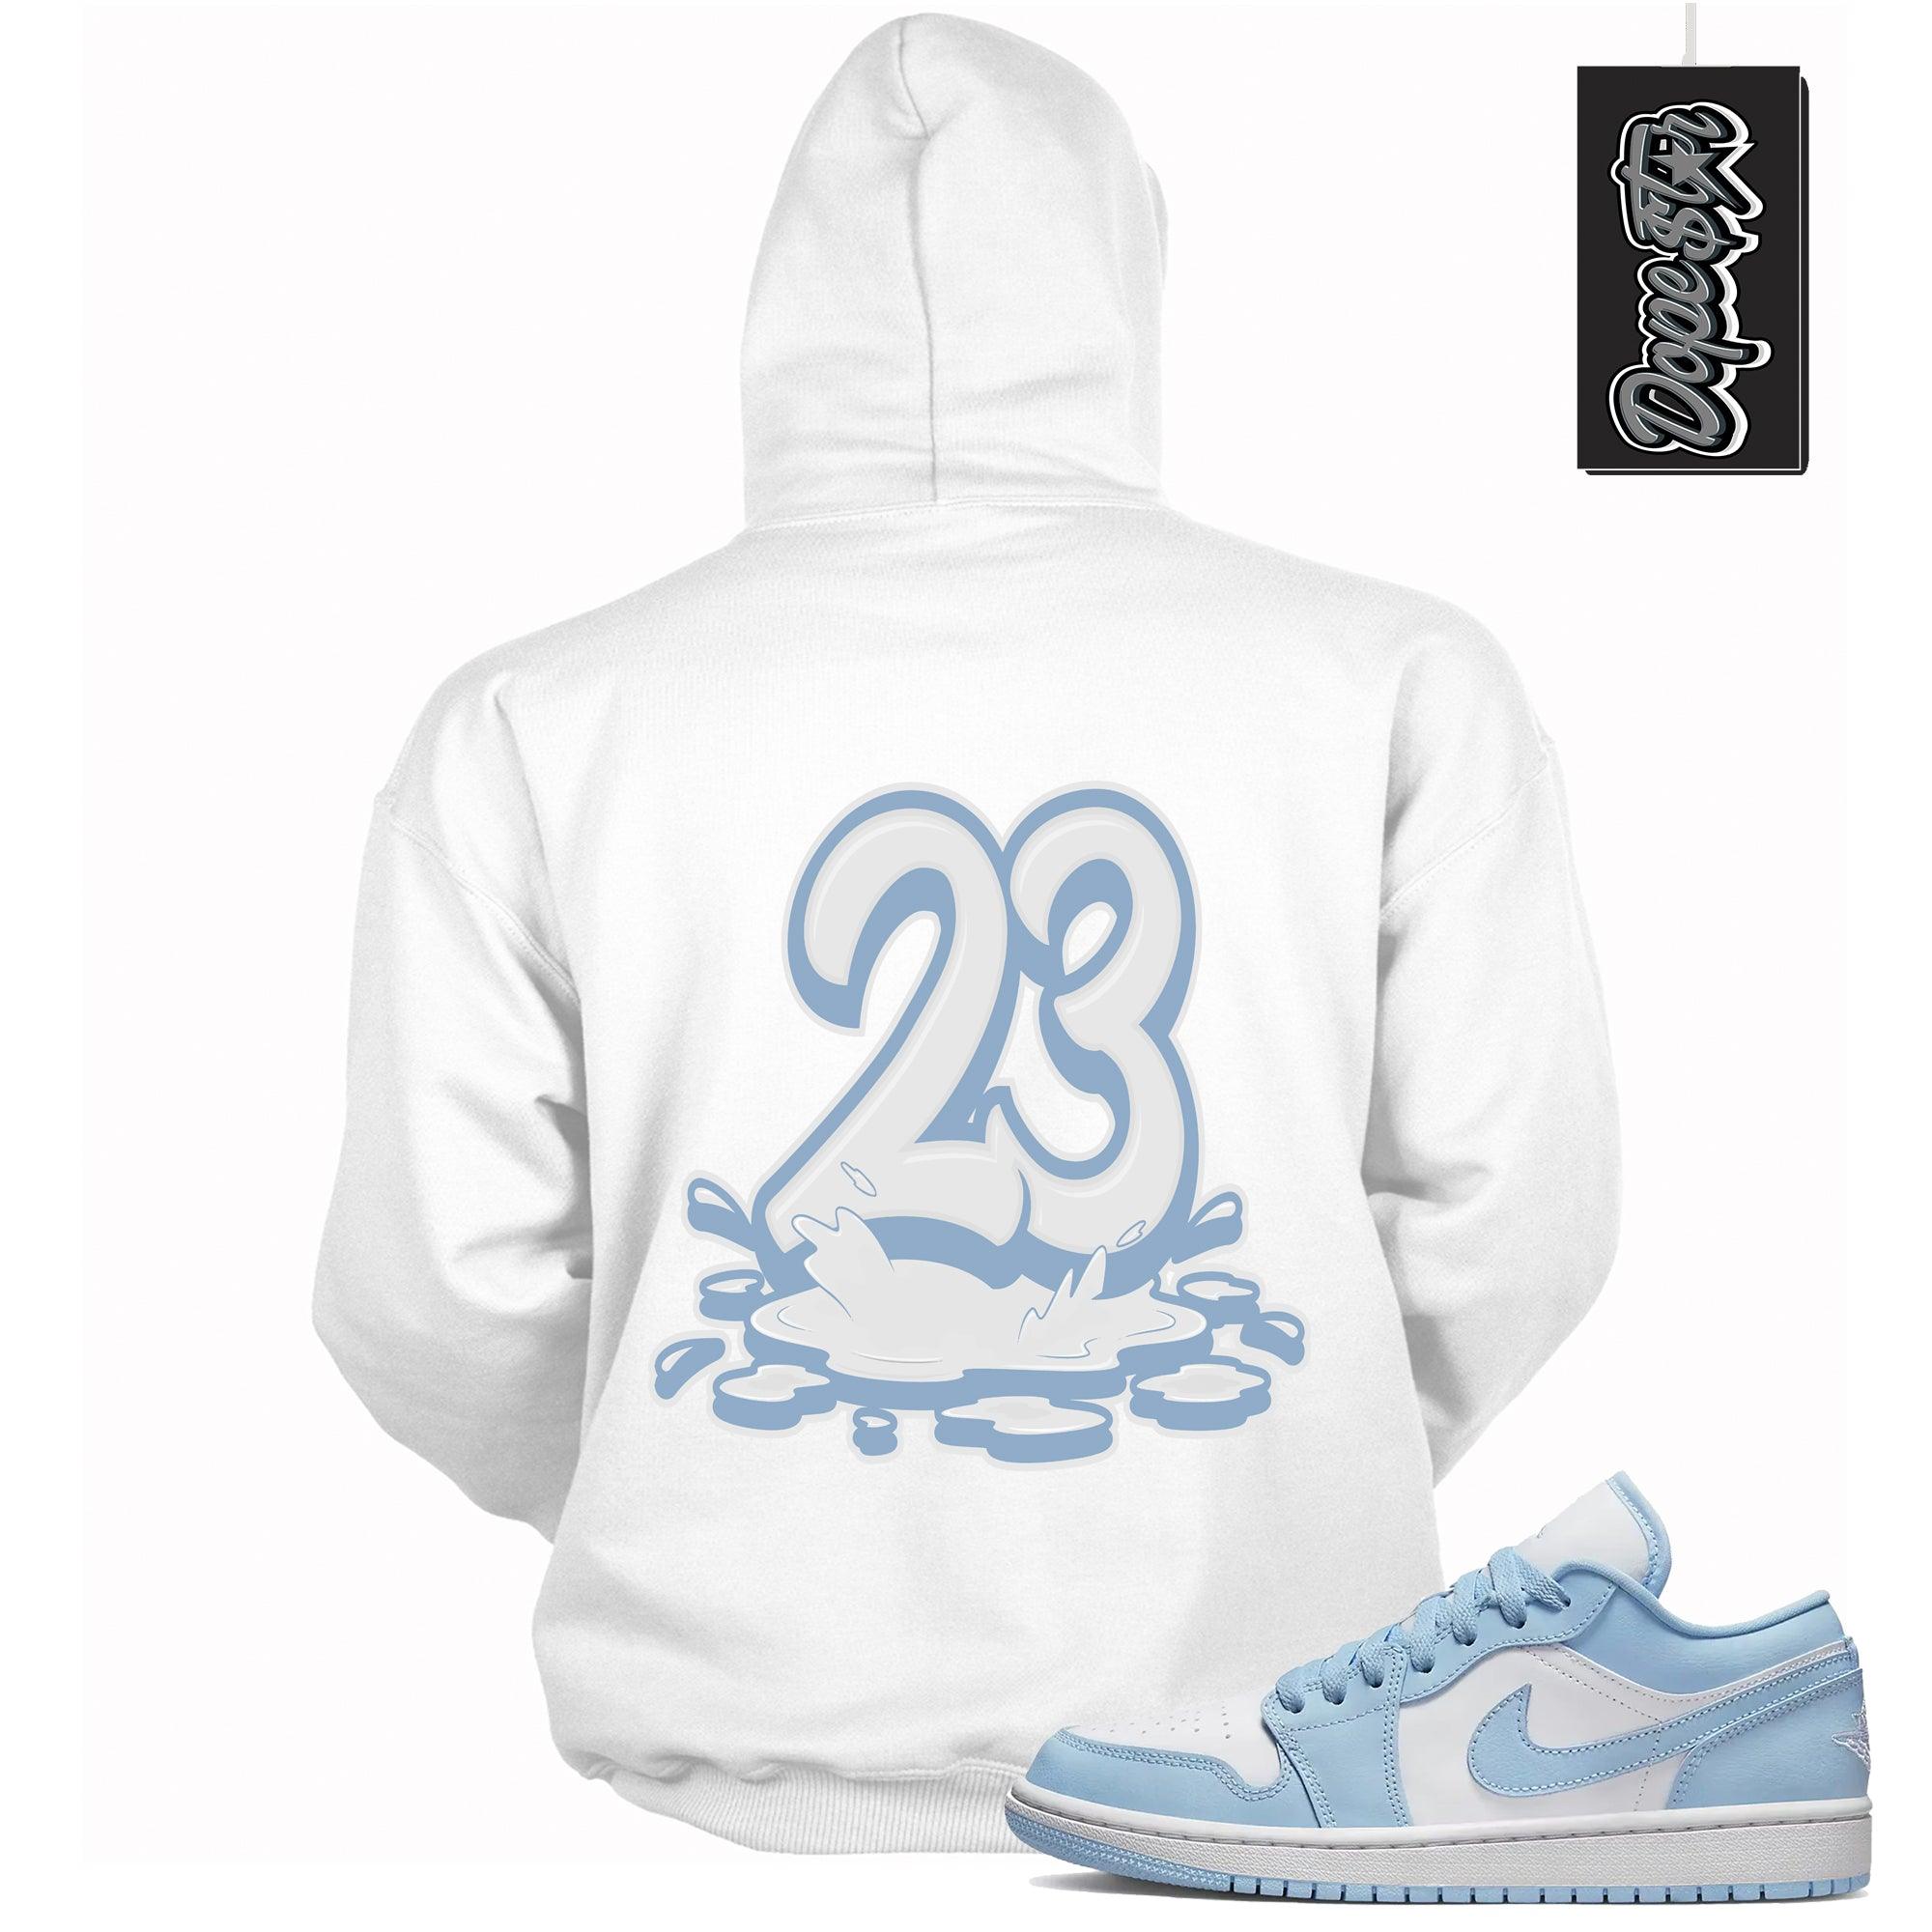 Cool White Graphic Hoodie with “ Number 23 Melting " print, that perfectly matches AJ 1 Low Aluminum sneakers